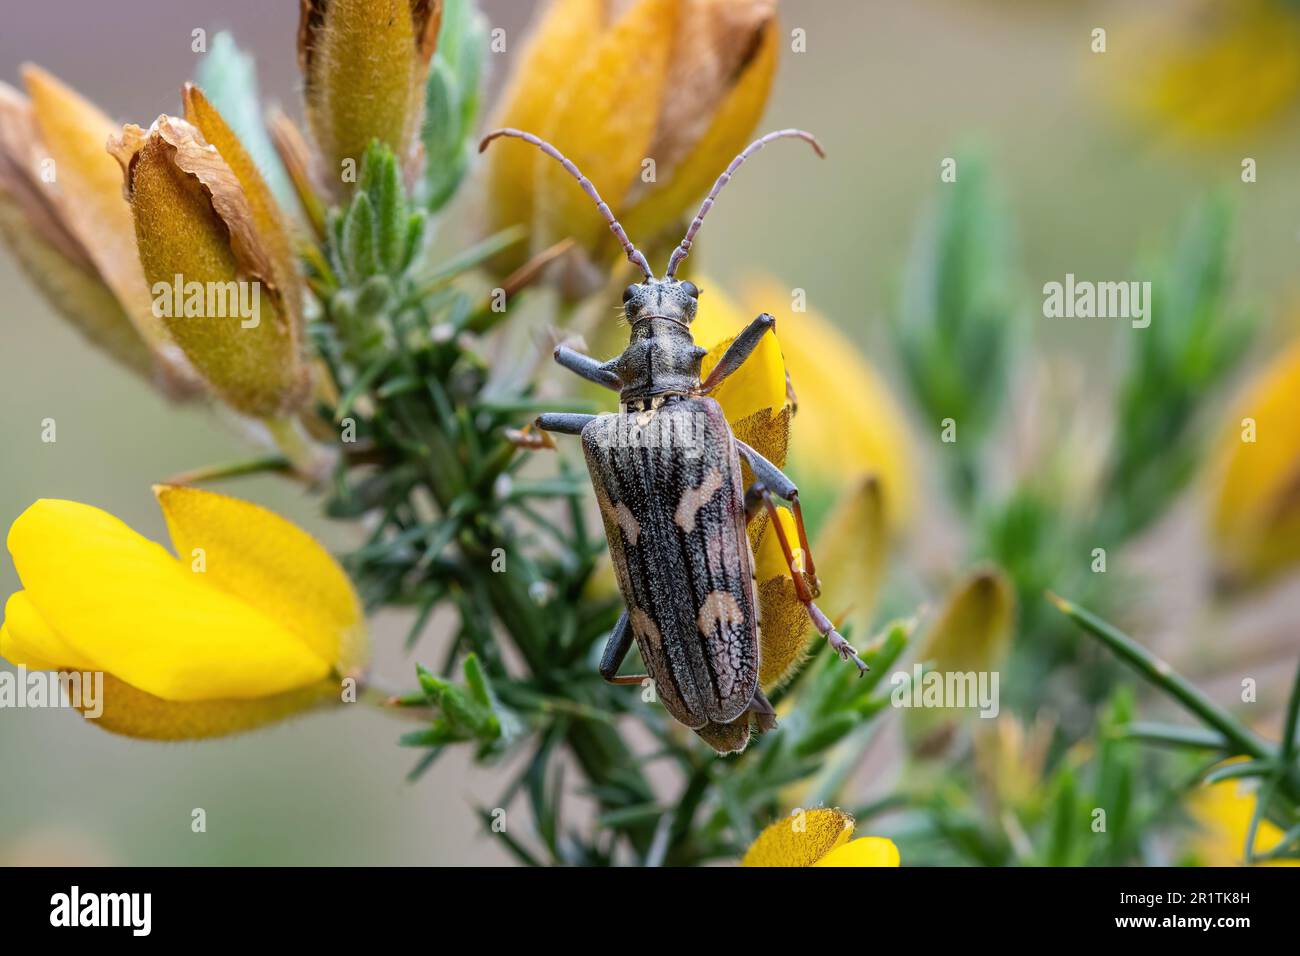 Rhagium bifasciatum, the two-banded longhorn beetle, on gorse bush with yellow flowers during spring, England, UK Stock Photo